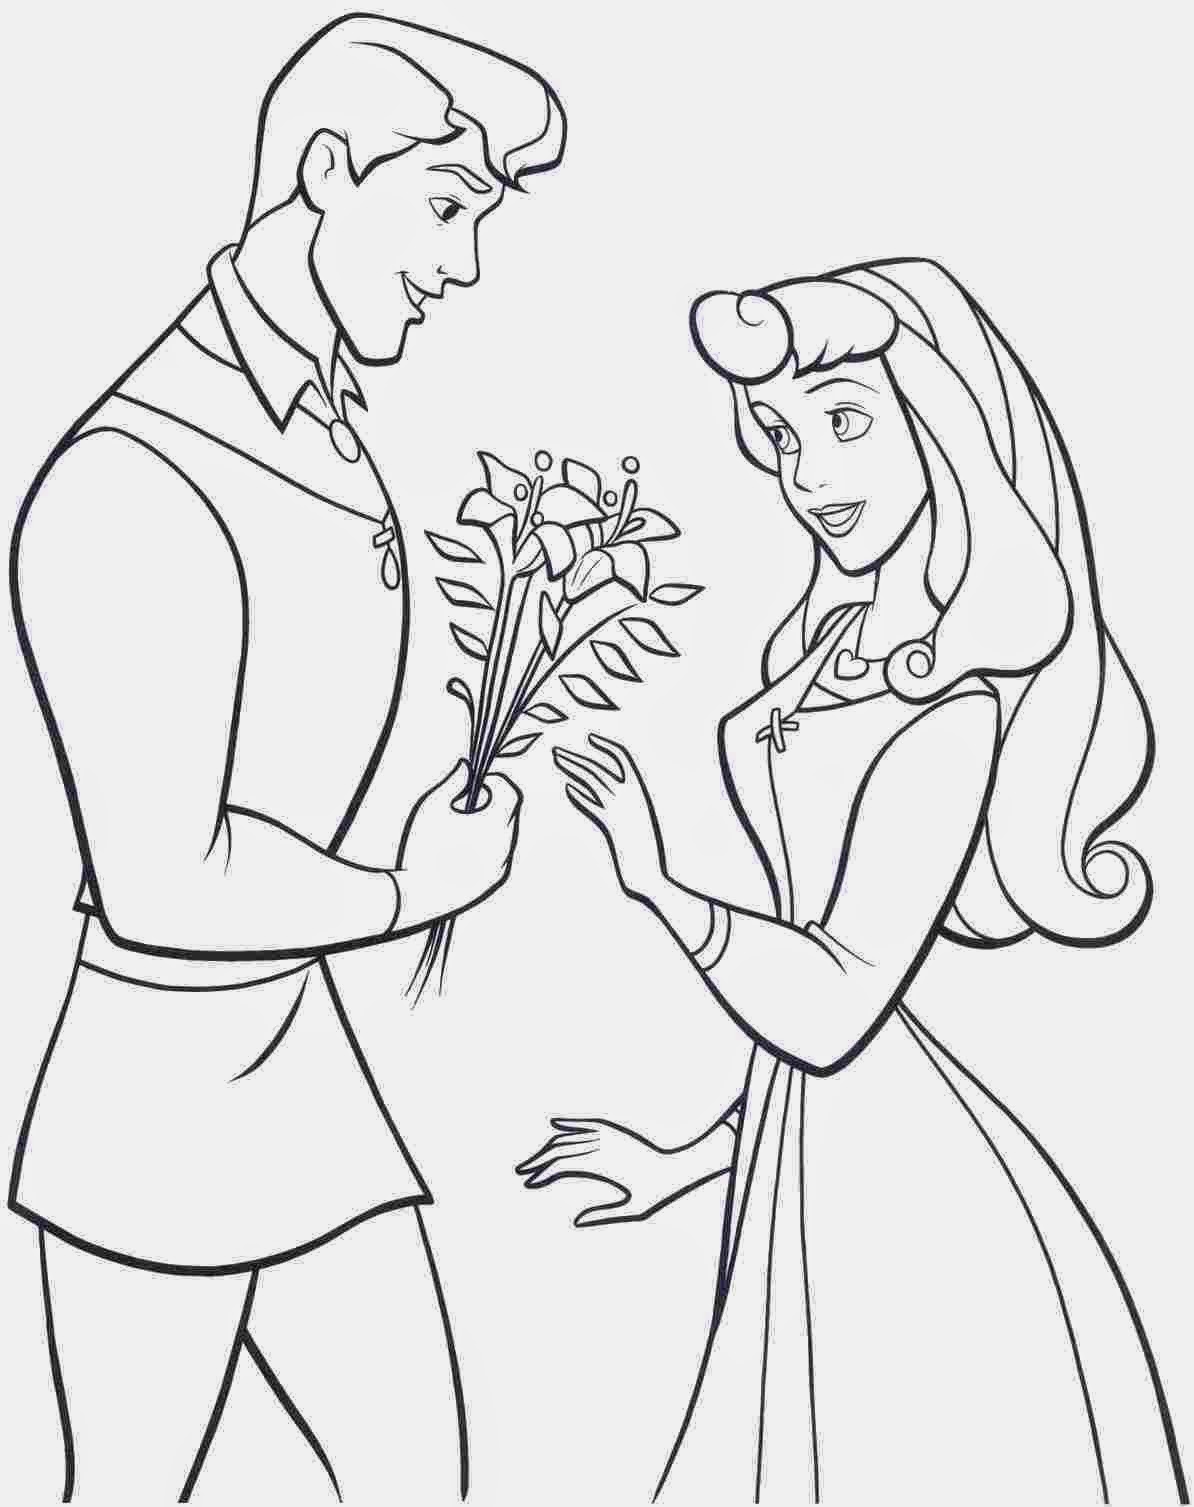 The Holiday Site Coloring Pages of Princess Aurora From 